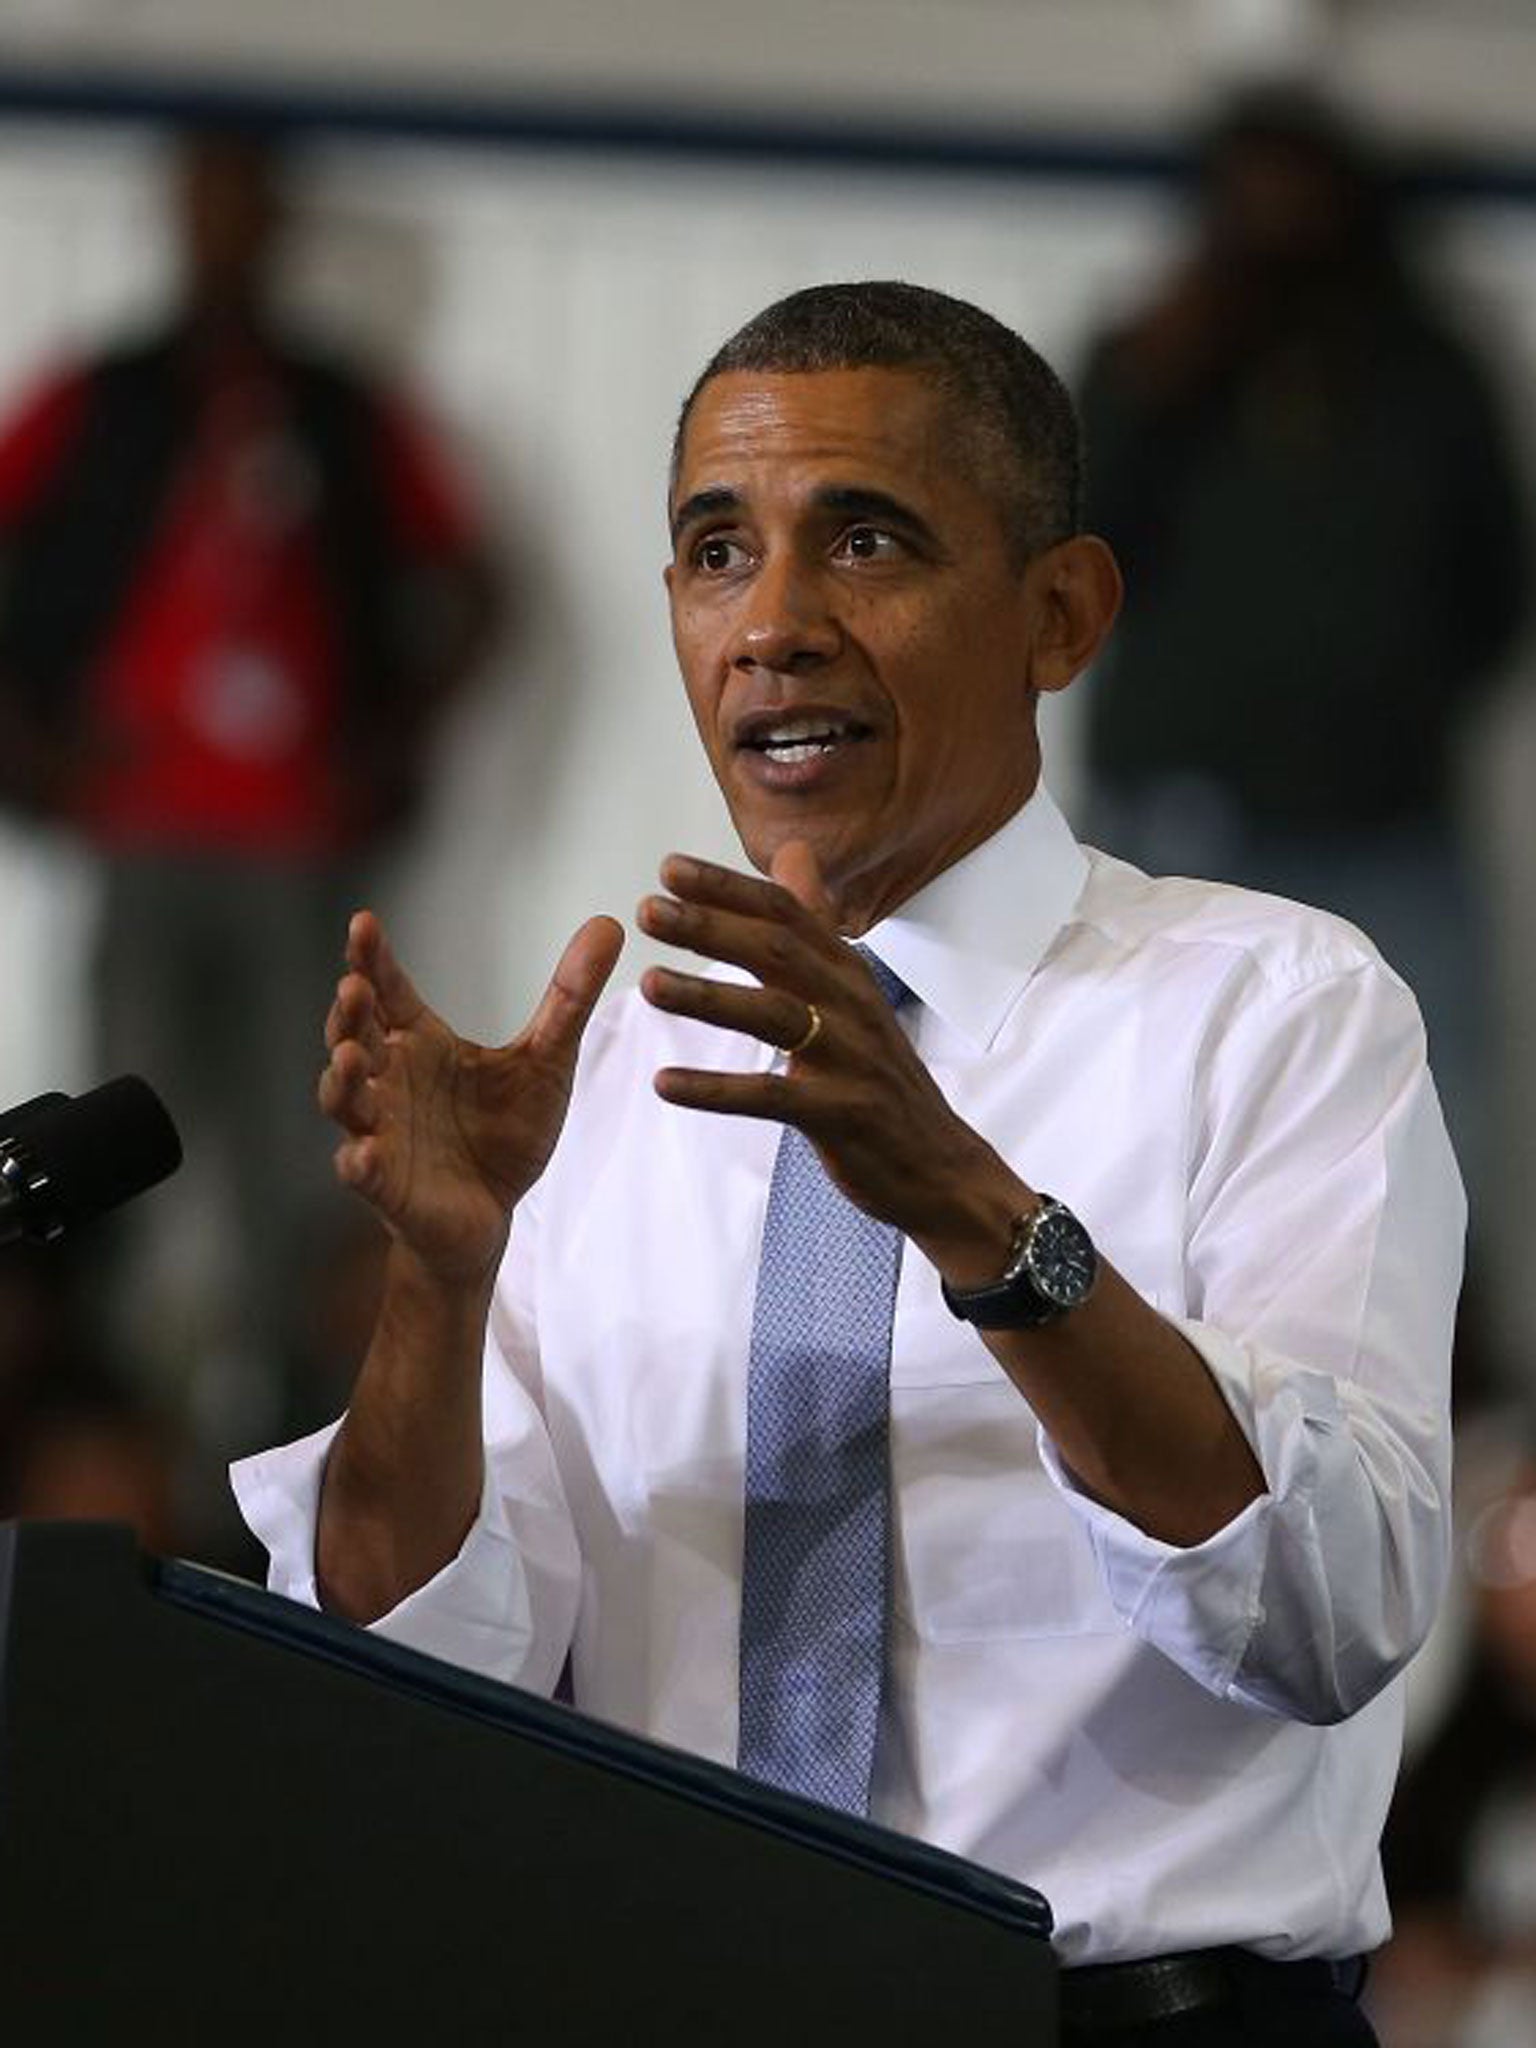 The President was speaking at a community college just outside Washington